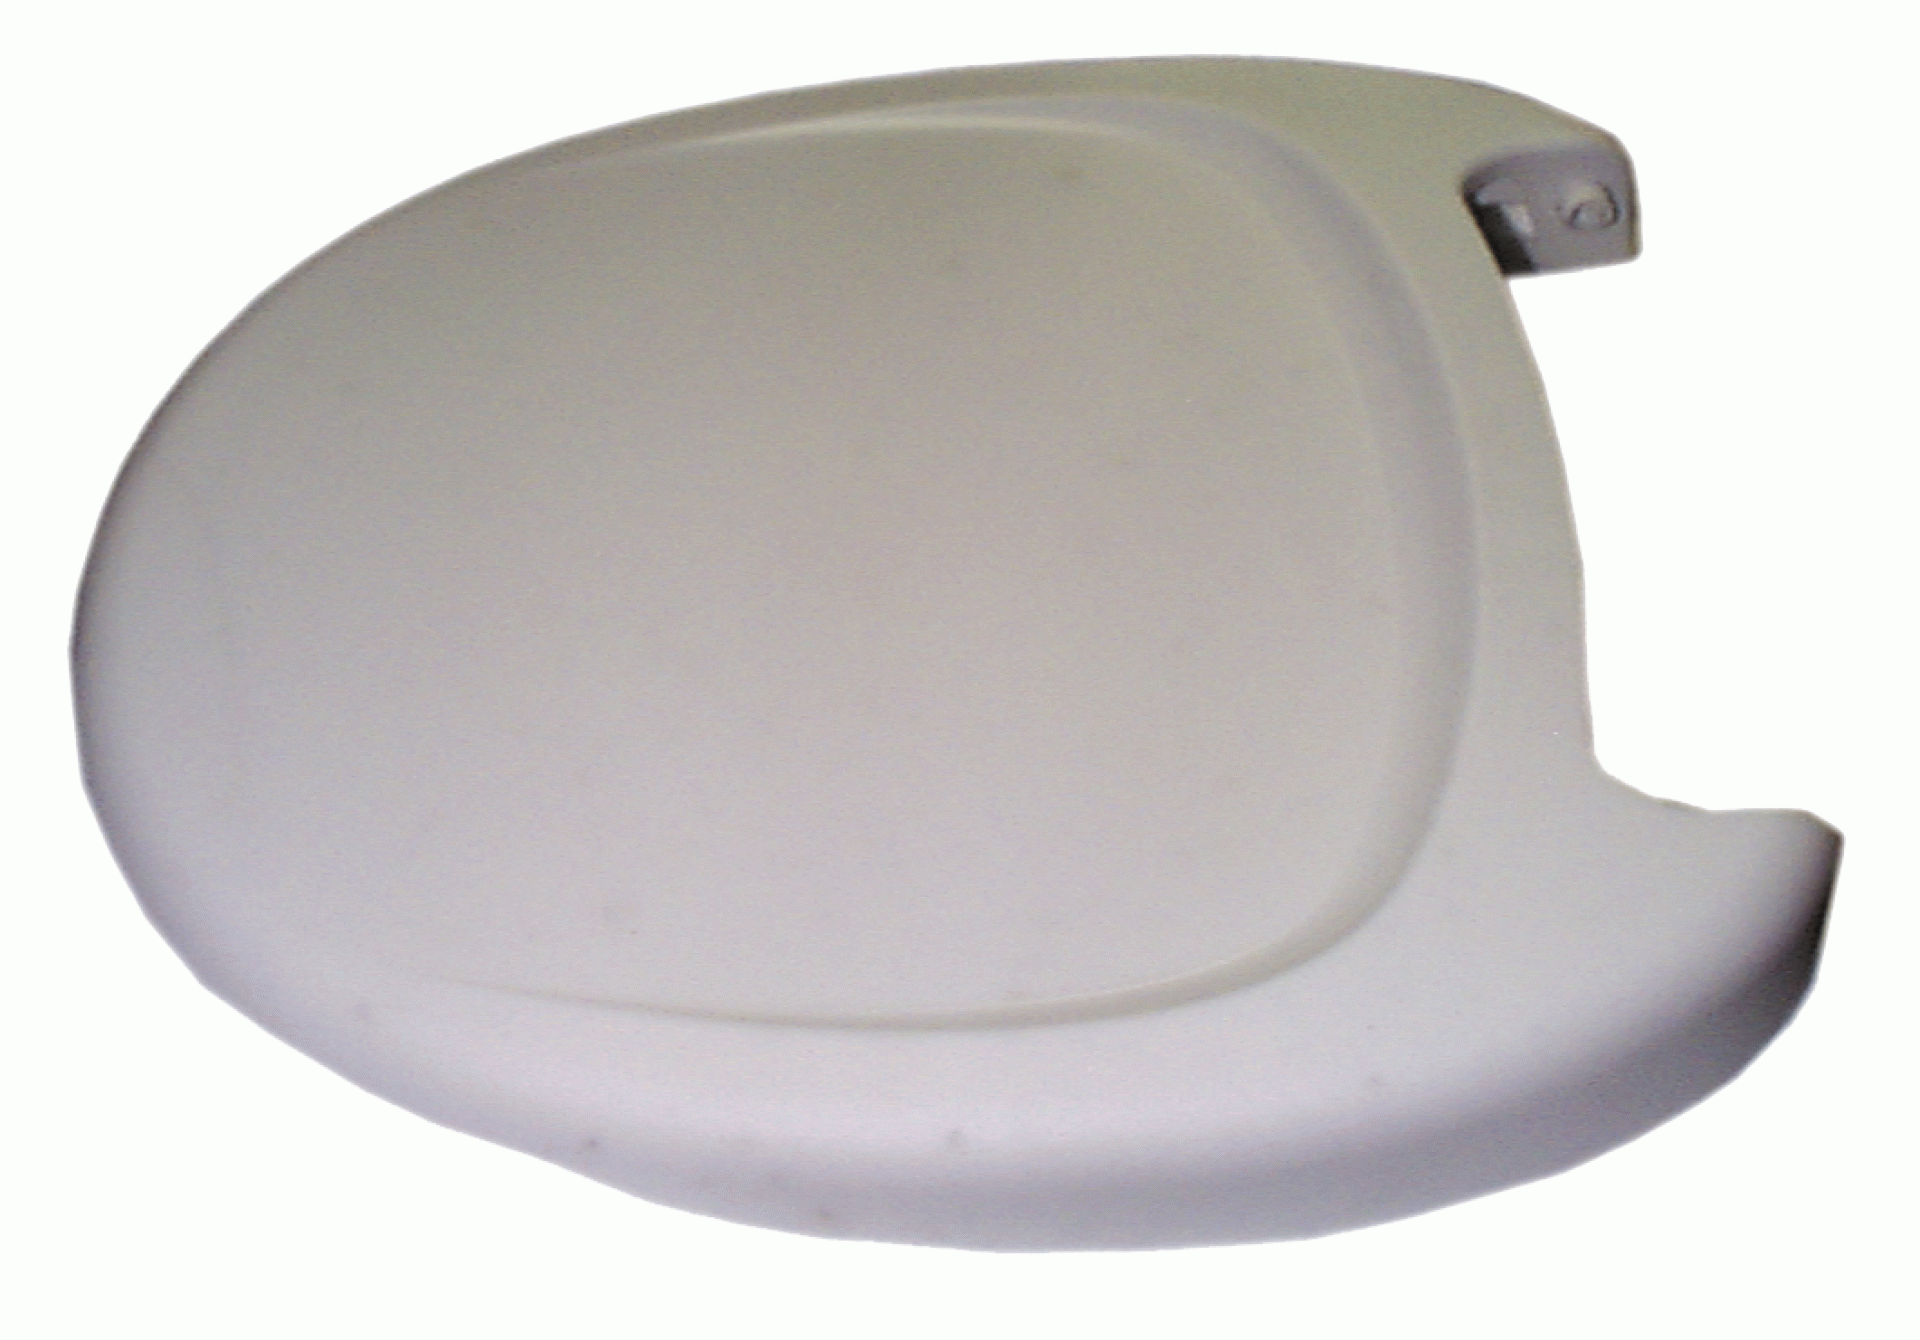 THETFORD CORP | 31704 | TOILET COVER/SEAT PARCHMENT AMV